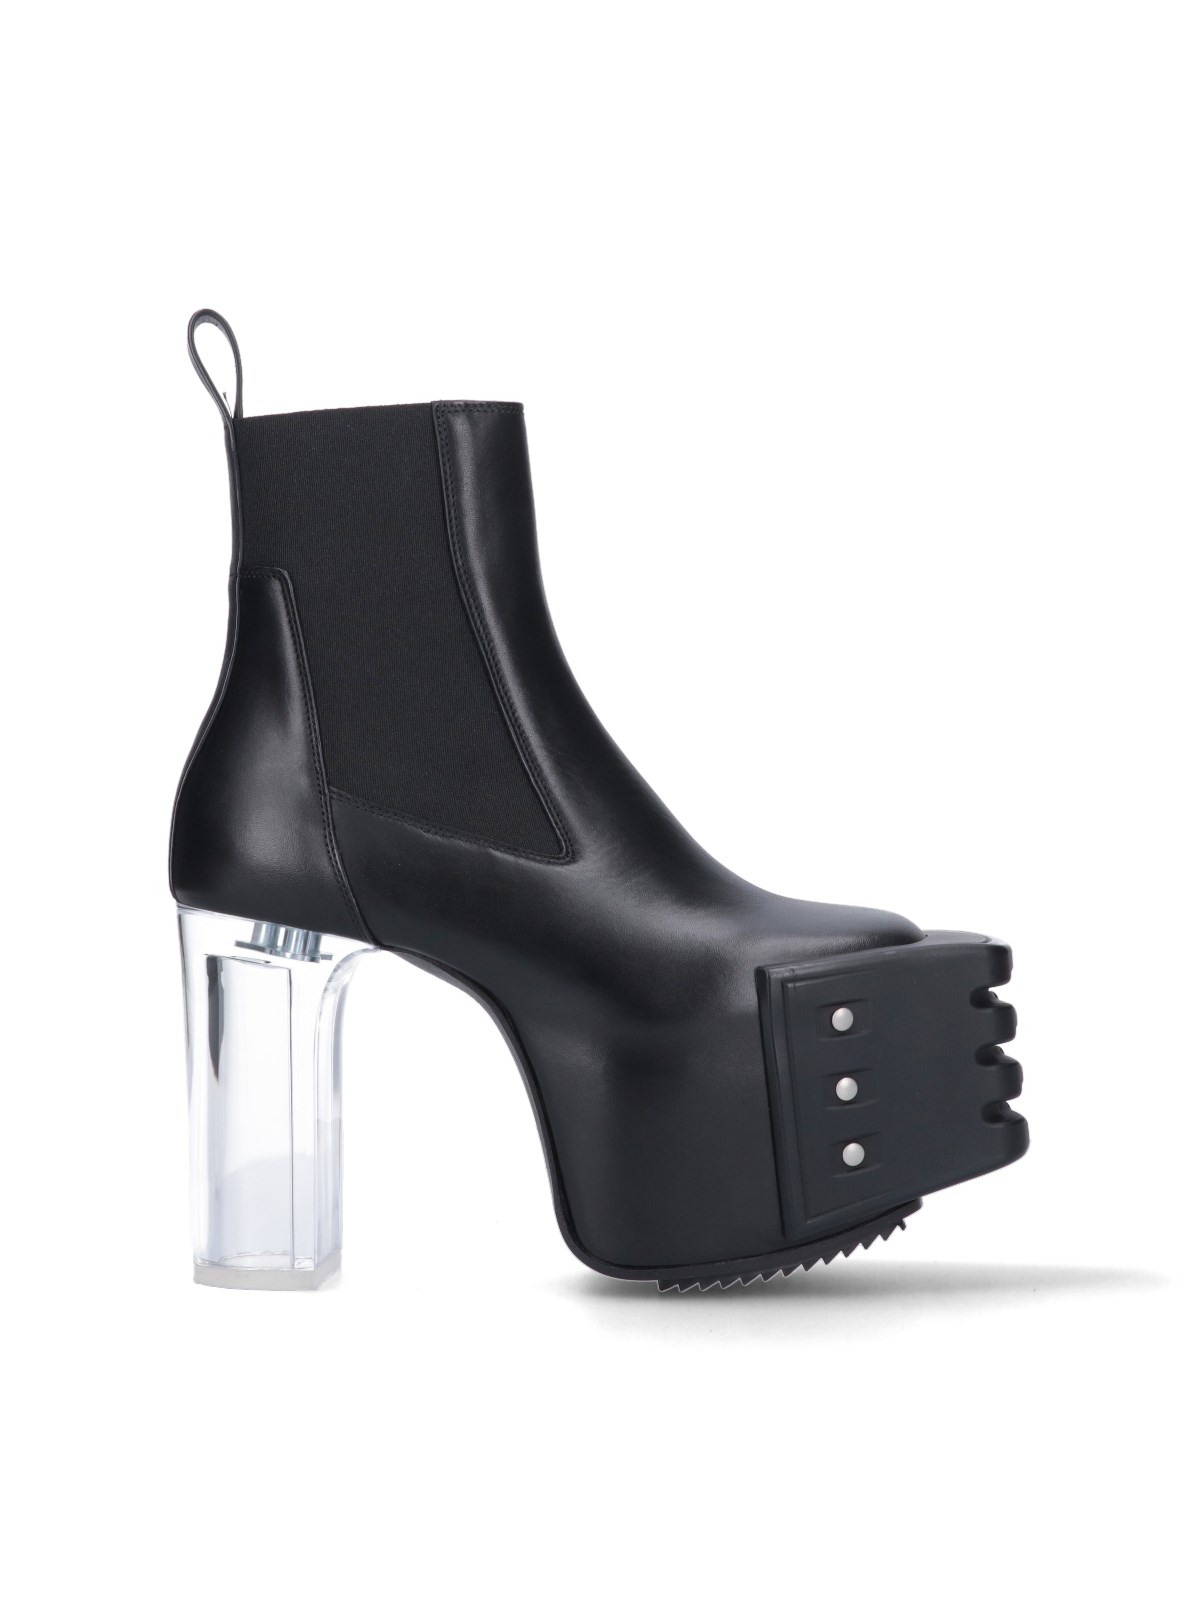 RICK OWENS "STROBE GRILLED" PLATEAU BOOTS